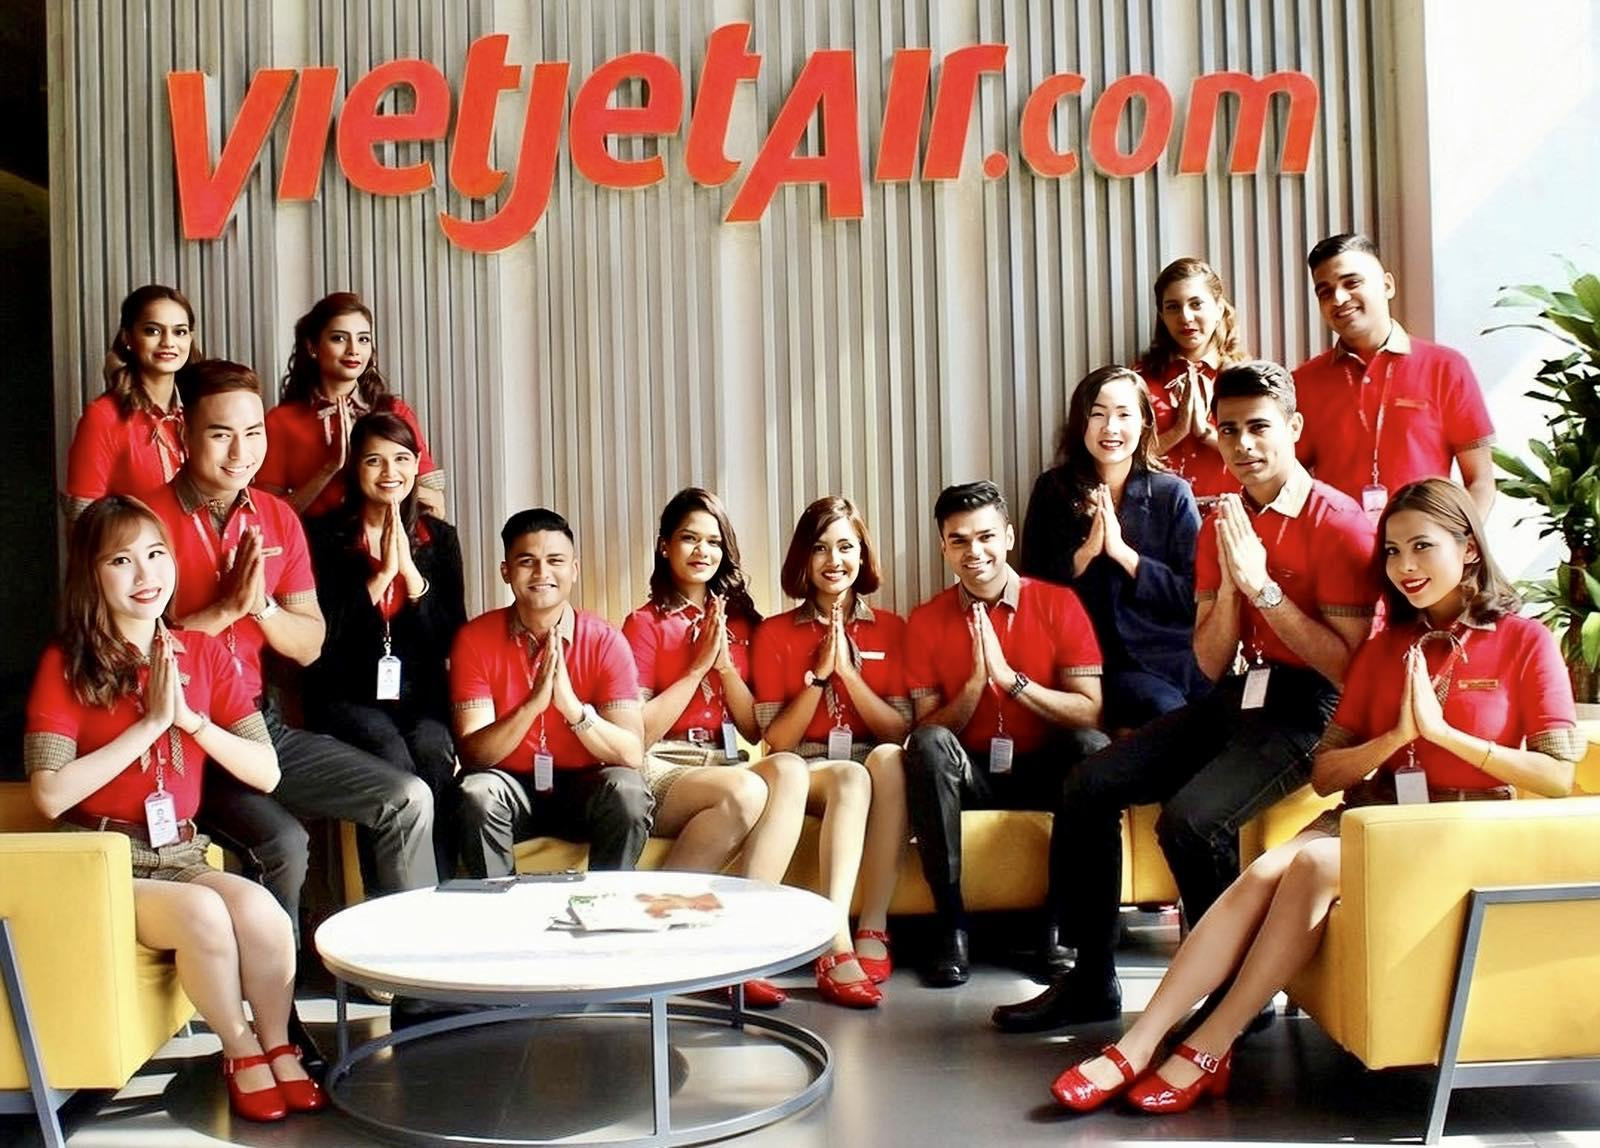 A group of people in red shirtsDescription automatically generated